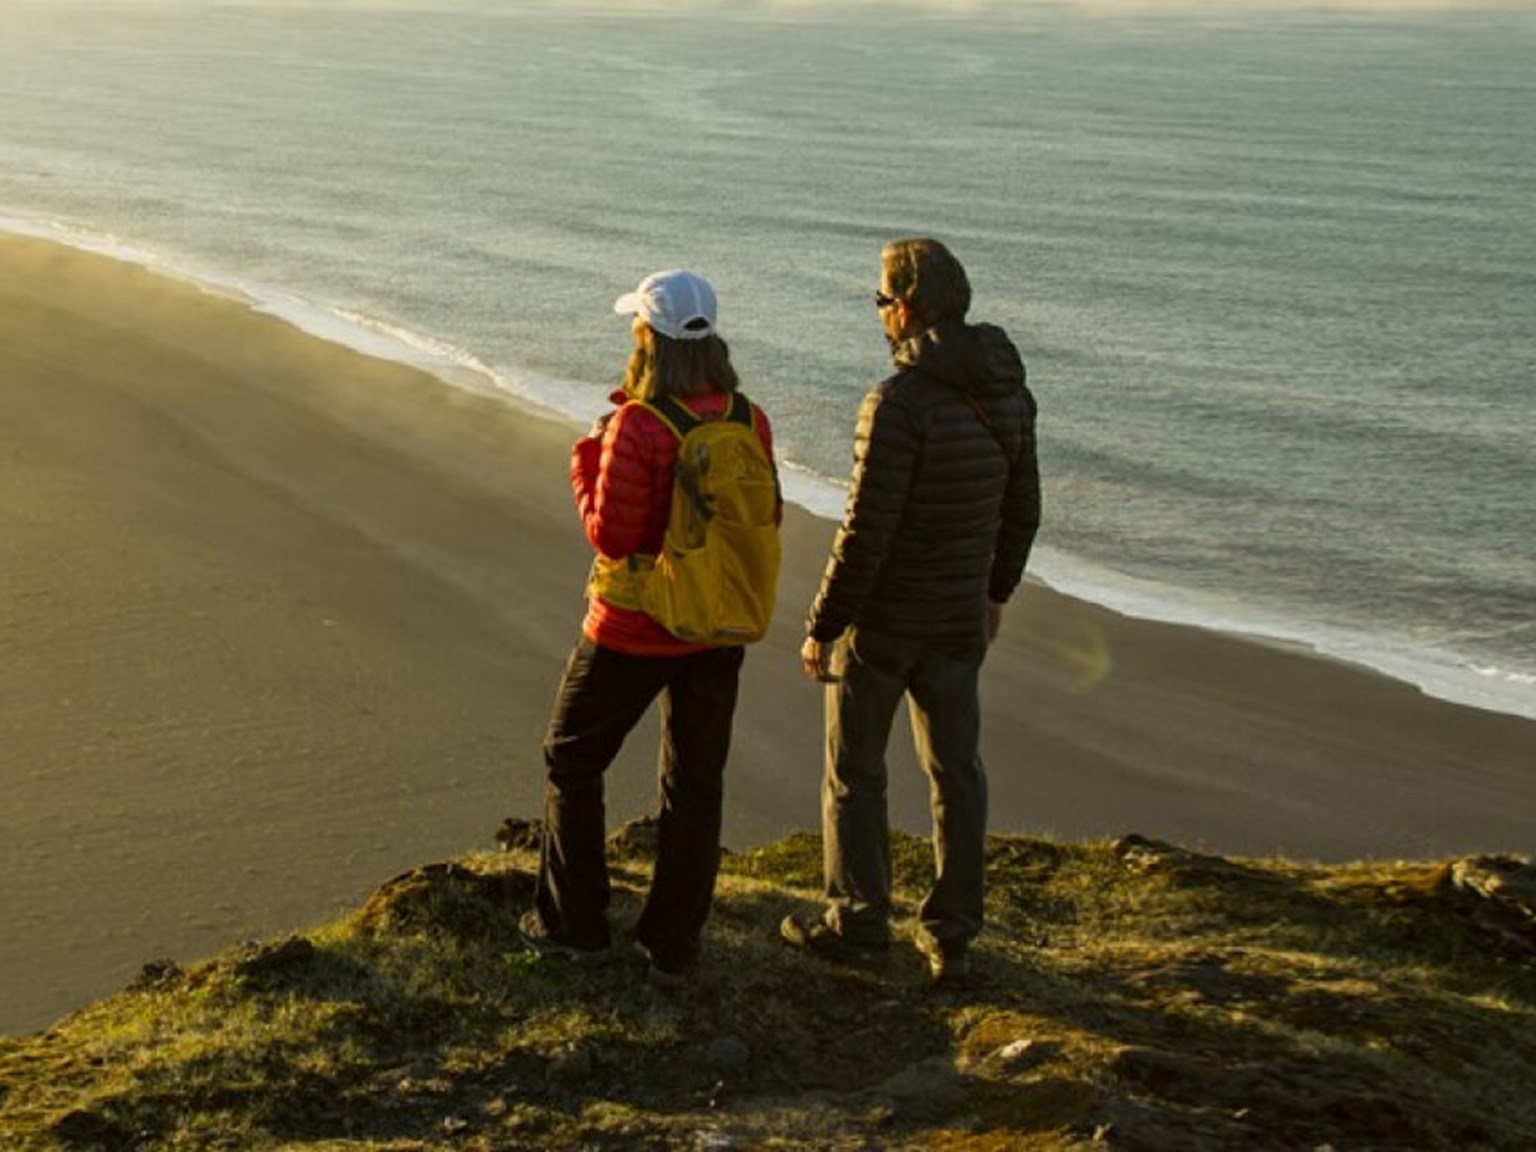 Active couple, stood on a cliff edge, overlooking a vast beach at sunset